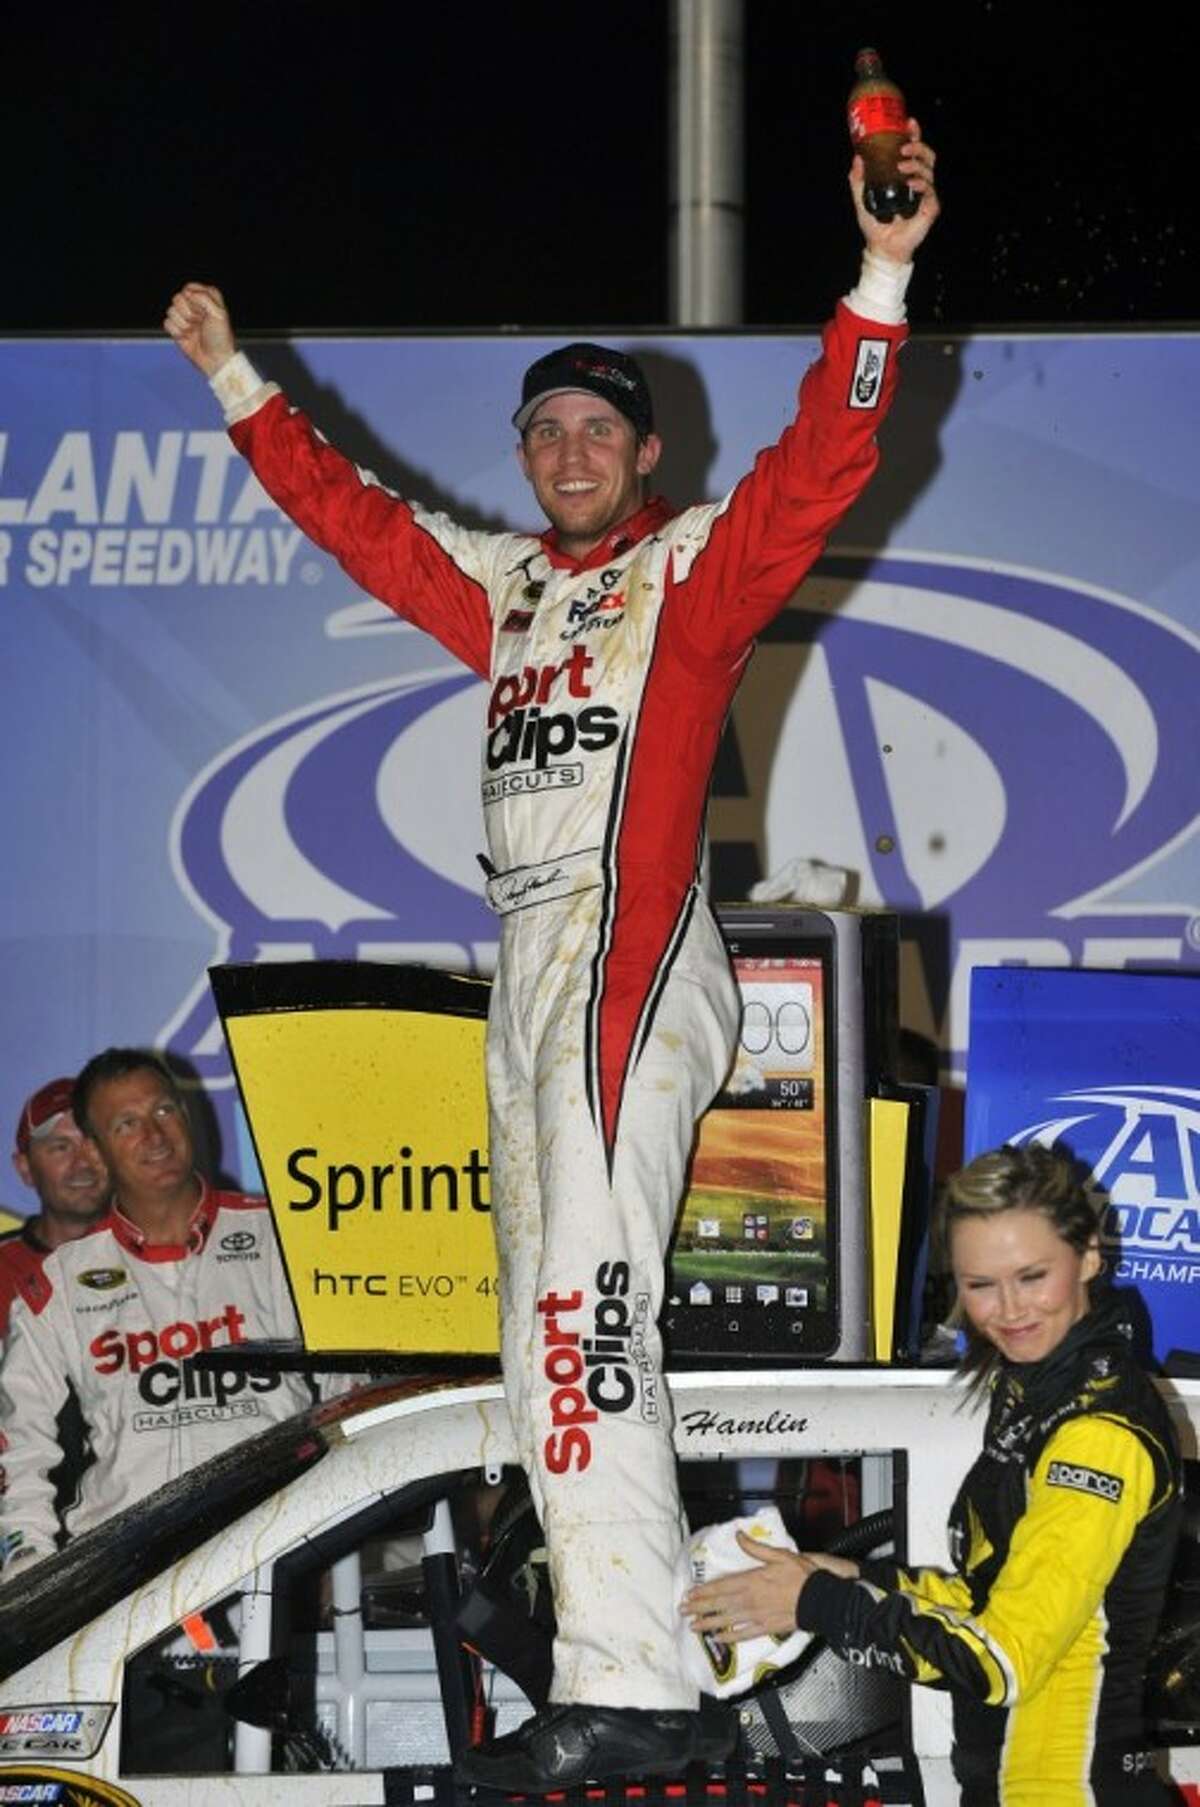 Denny Hamlin celebrates in Victory Lane after winning the NASCAR Sprint Cup Series auto race at Atlanta Motor Speedway.